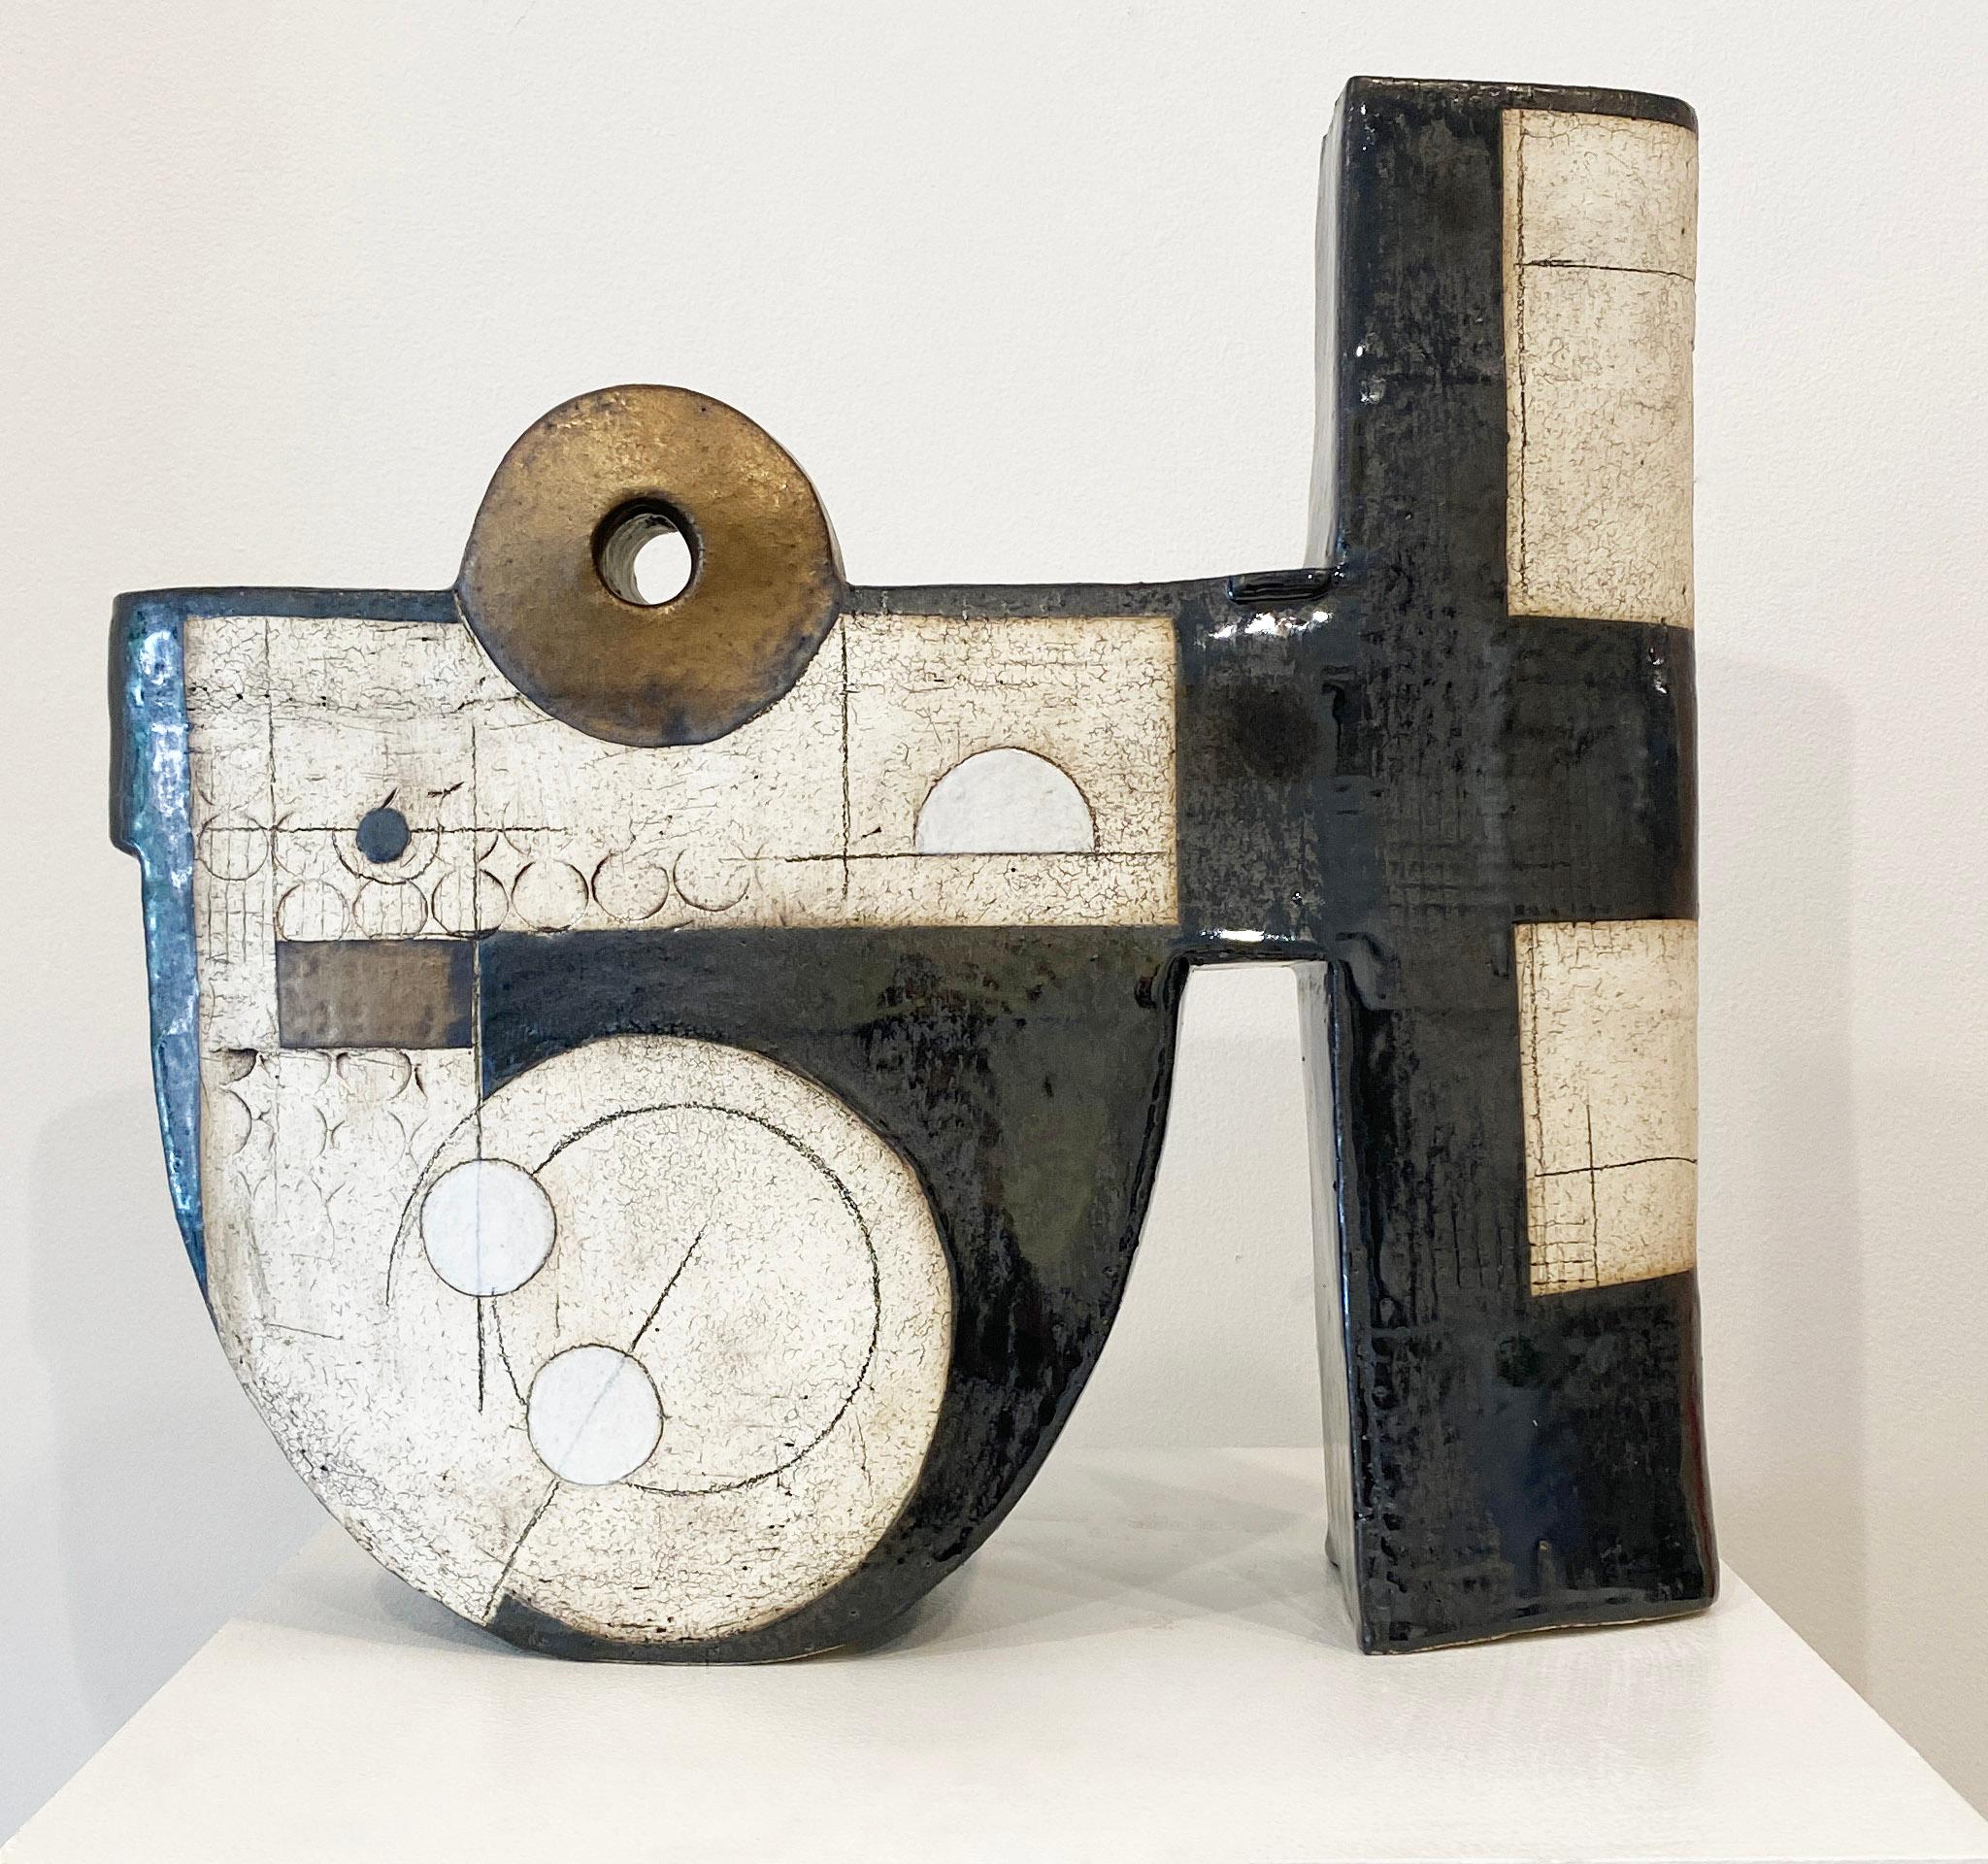 'Moonlight Waltz,' 2022 by Contemporary American artist, Sheryl Zacharia. Ceramic, 14.5 x 16 x 5 in. This sculpture incorporates a bold palette of colors in gold, white, and black. 

Zacharia's table-sized ceramics are a conversation between